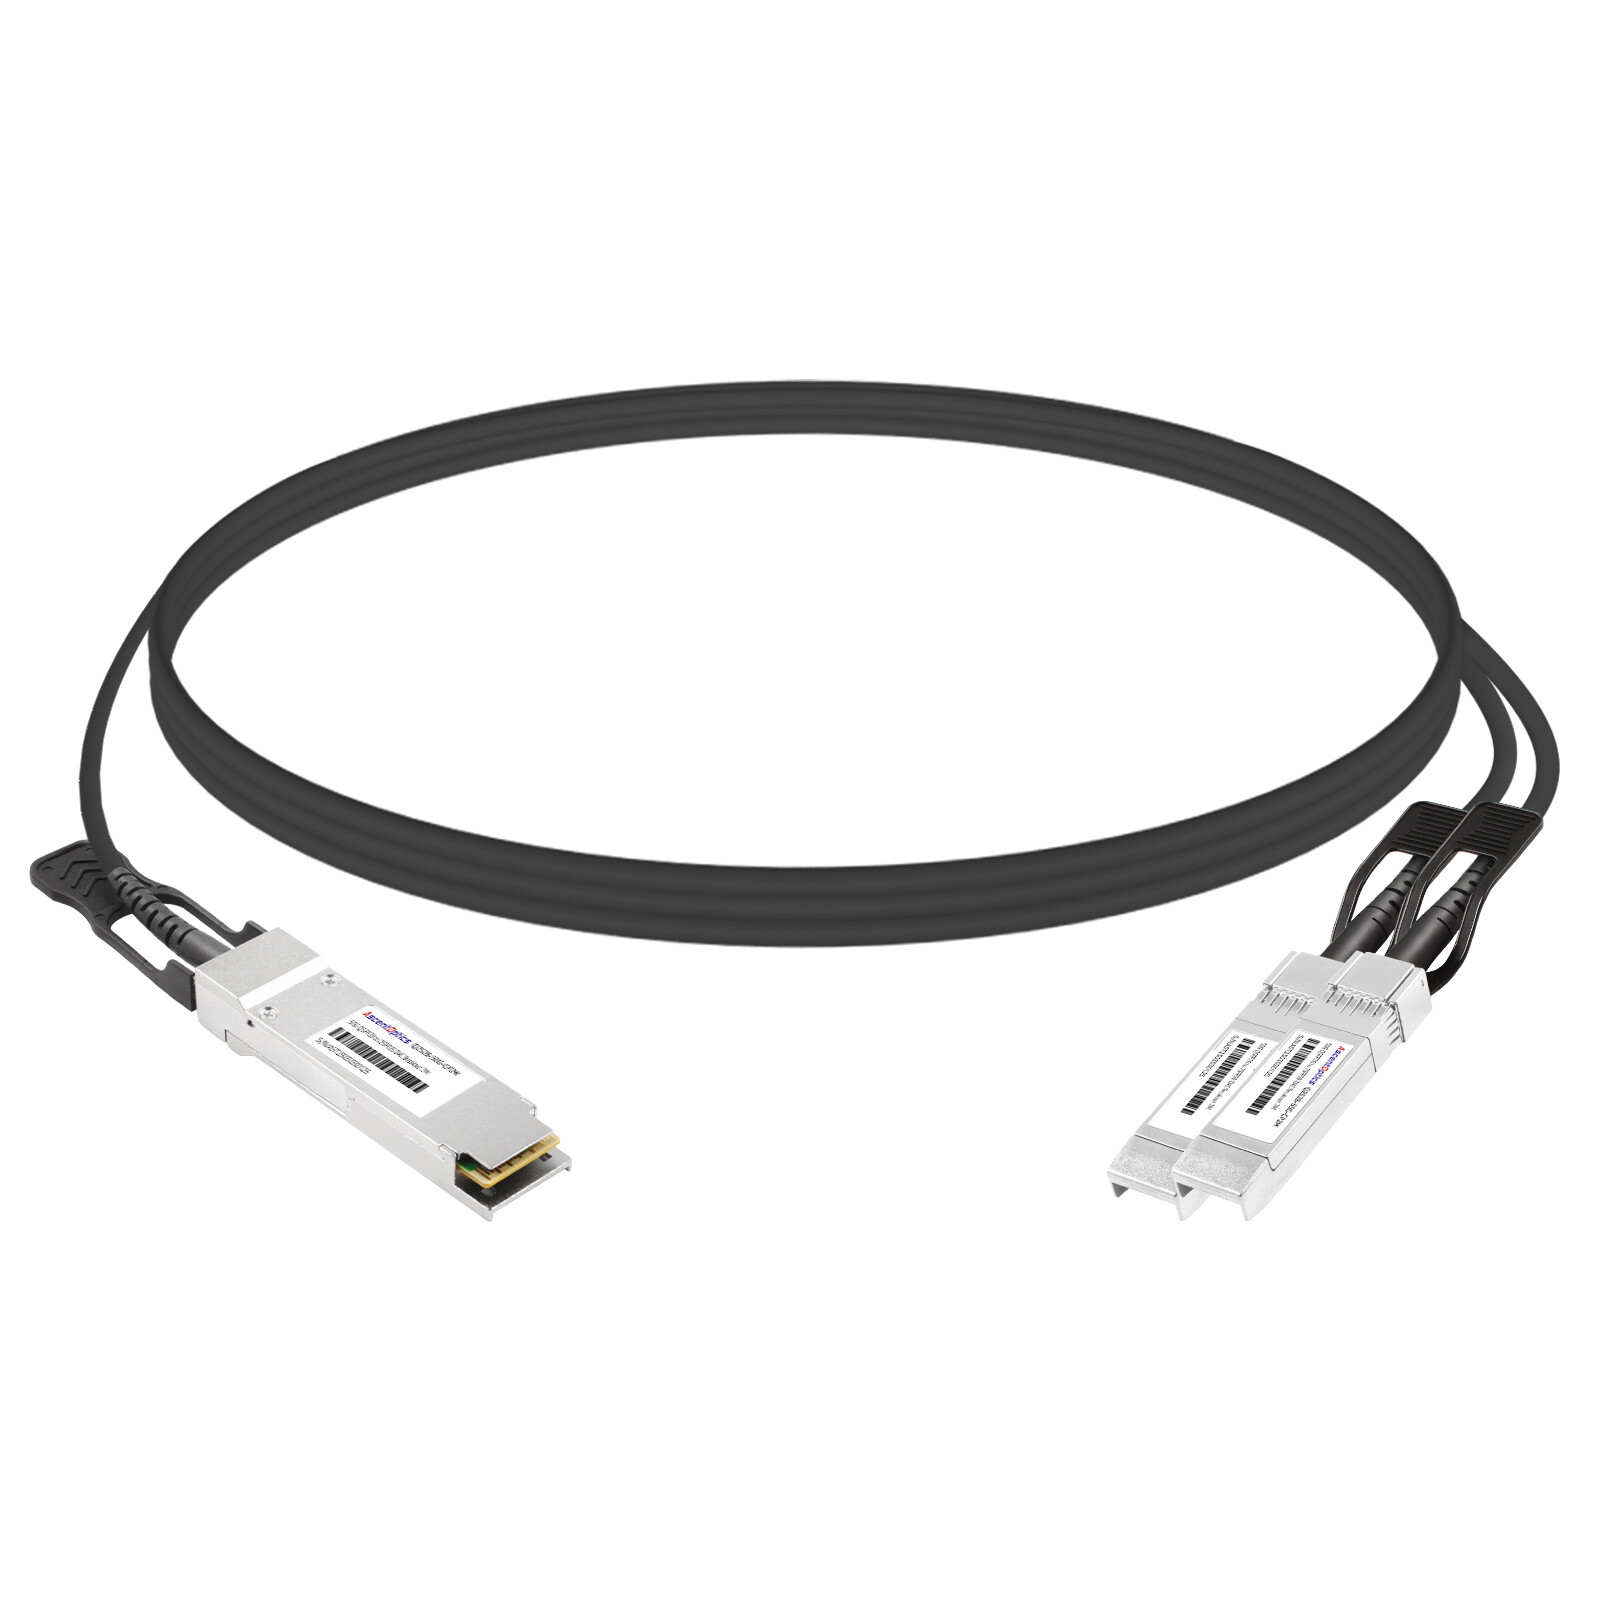 50G QSFP28 to 2x 25G SFP28 Copper Breakout Cable,2 Meters,Passive